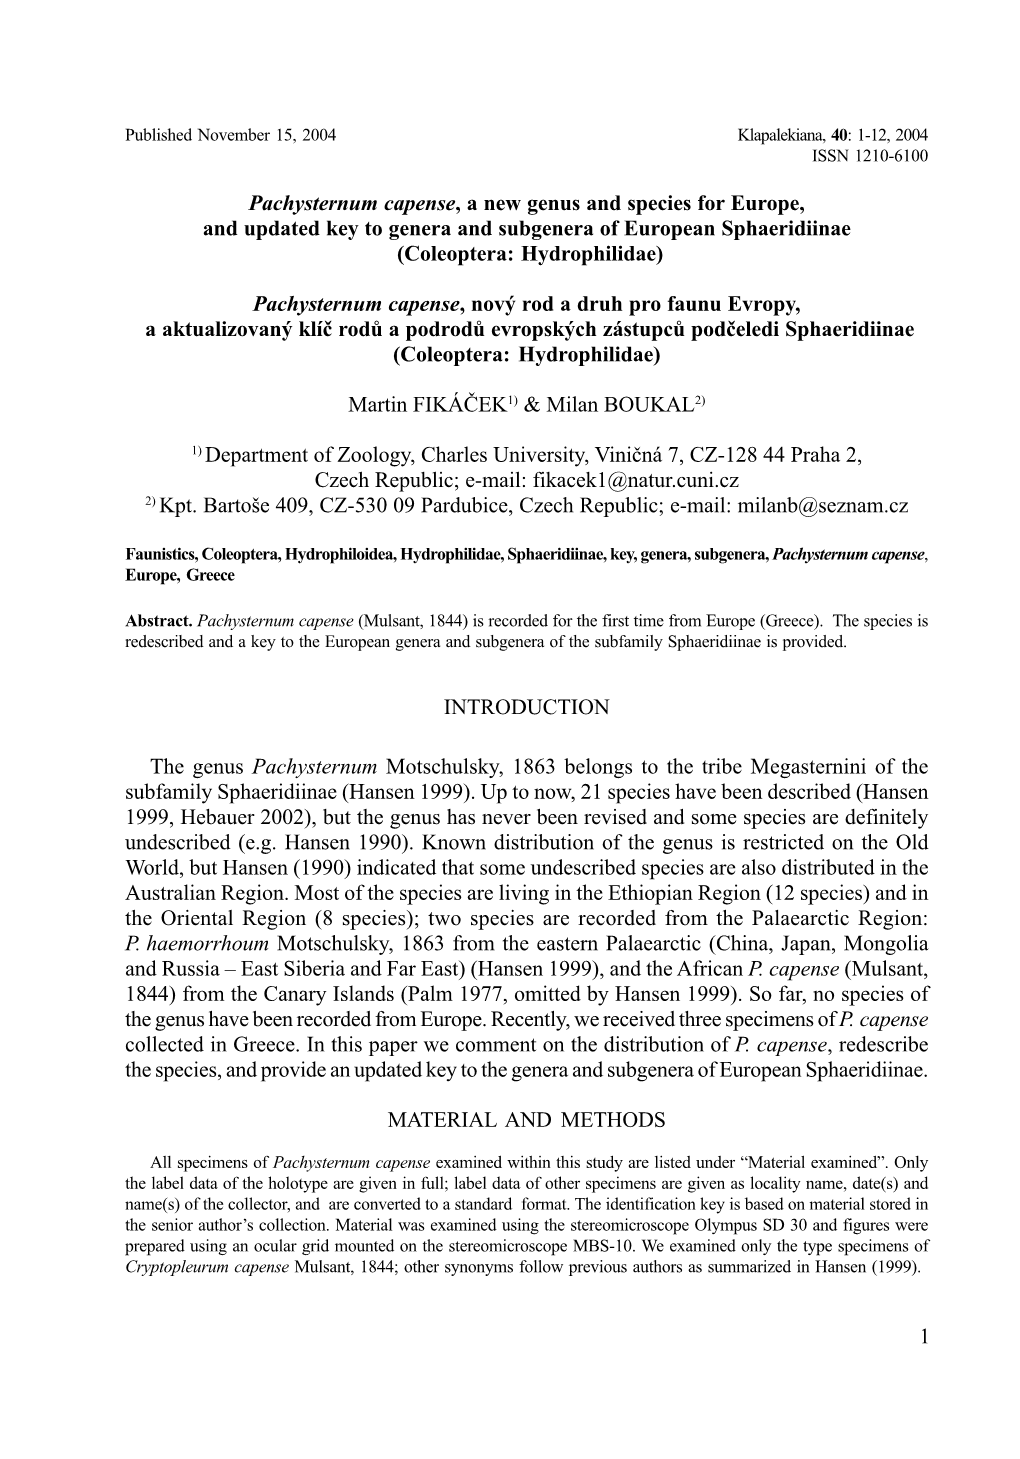 1 Pachysternum Capense, a New Genus and Species for Europe, And